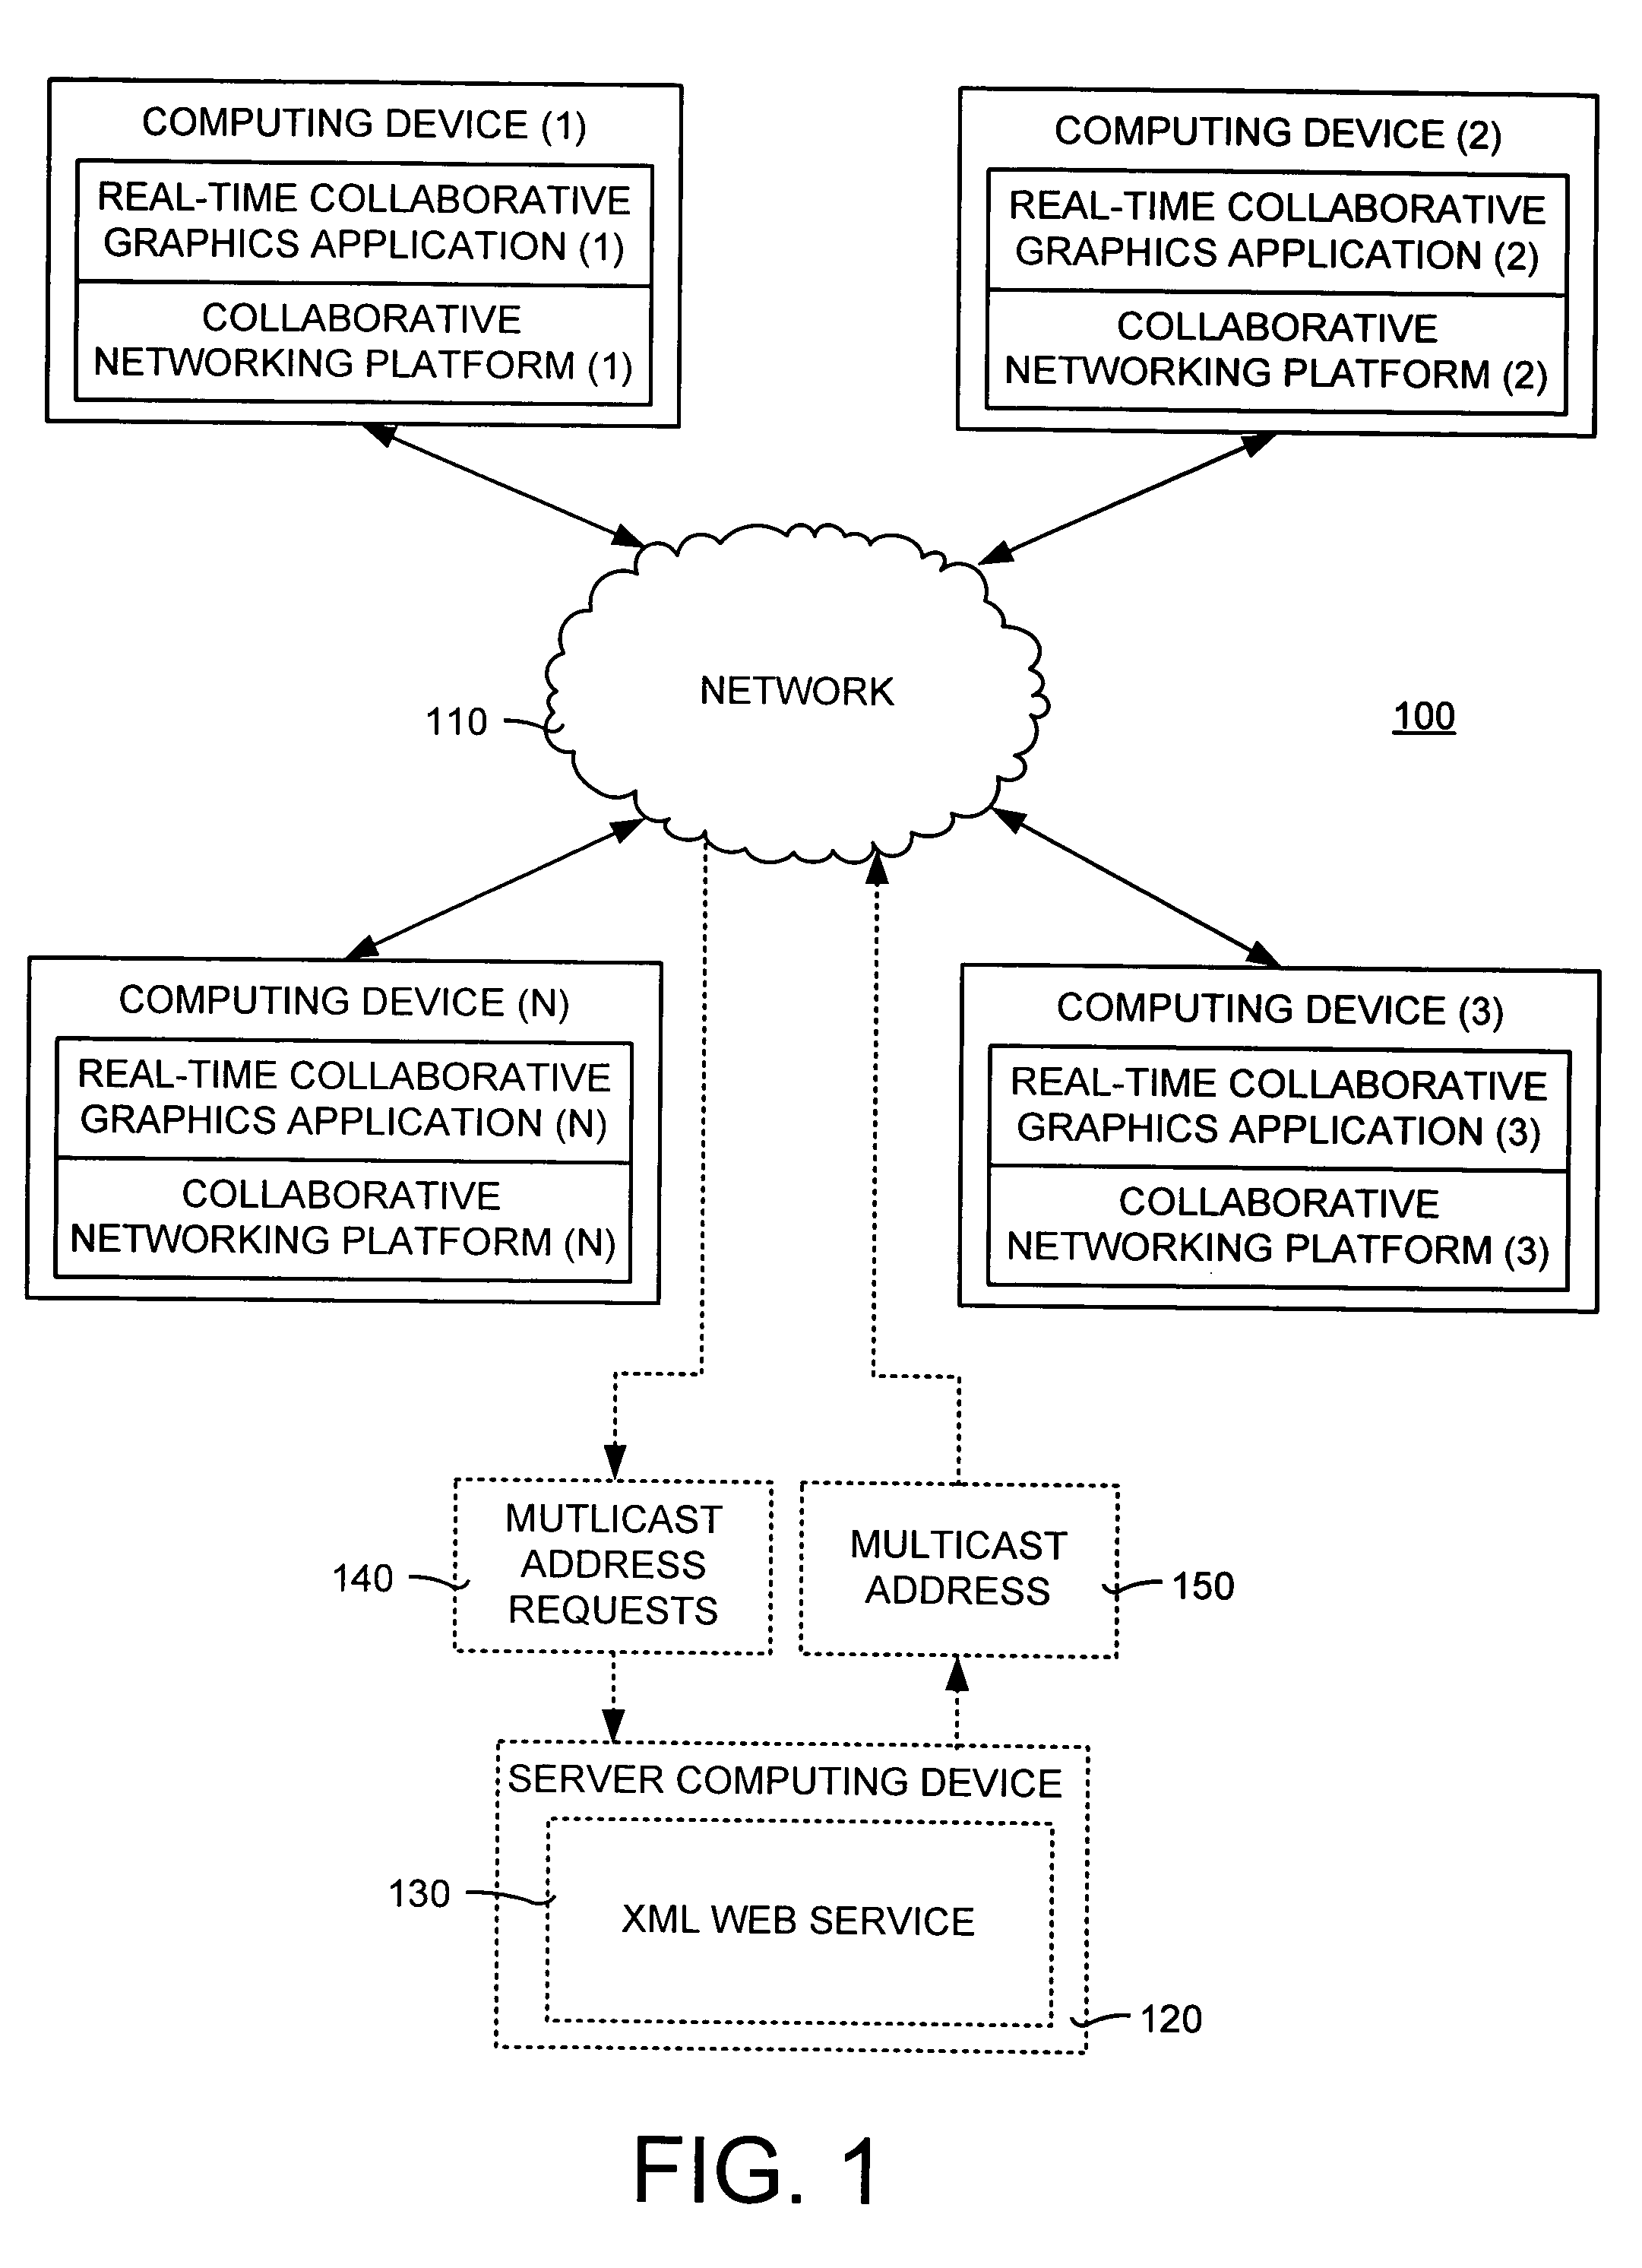 Real-time collaborative graphics application and method for use on a computer network having a collaborative networking platform